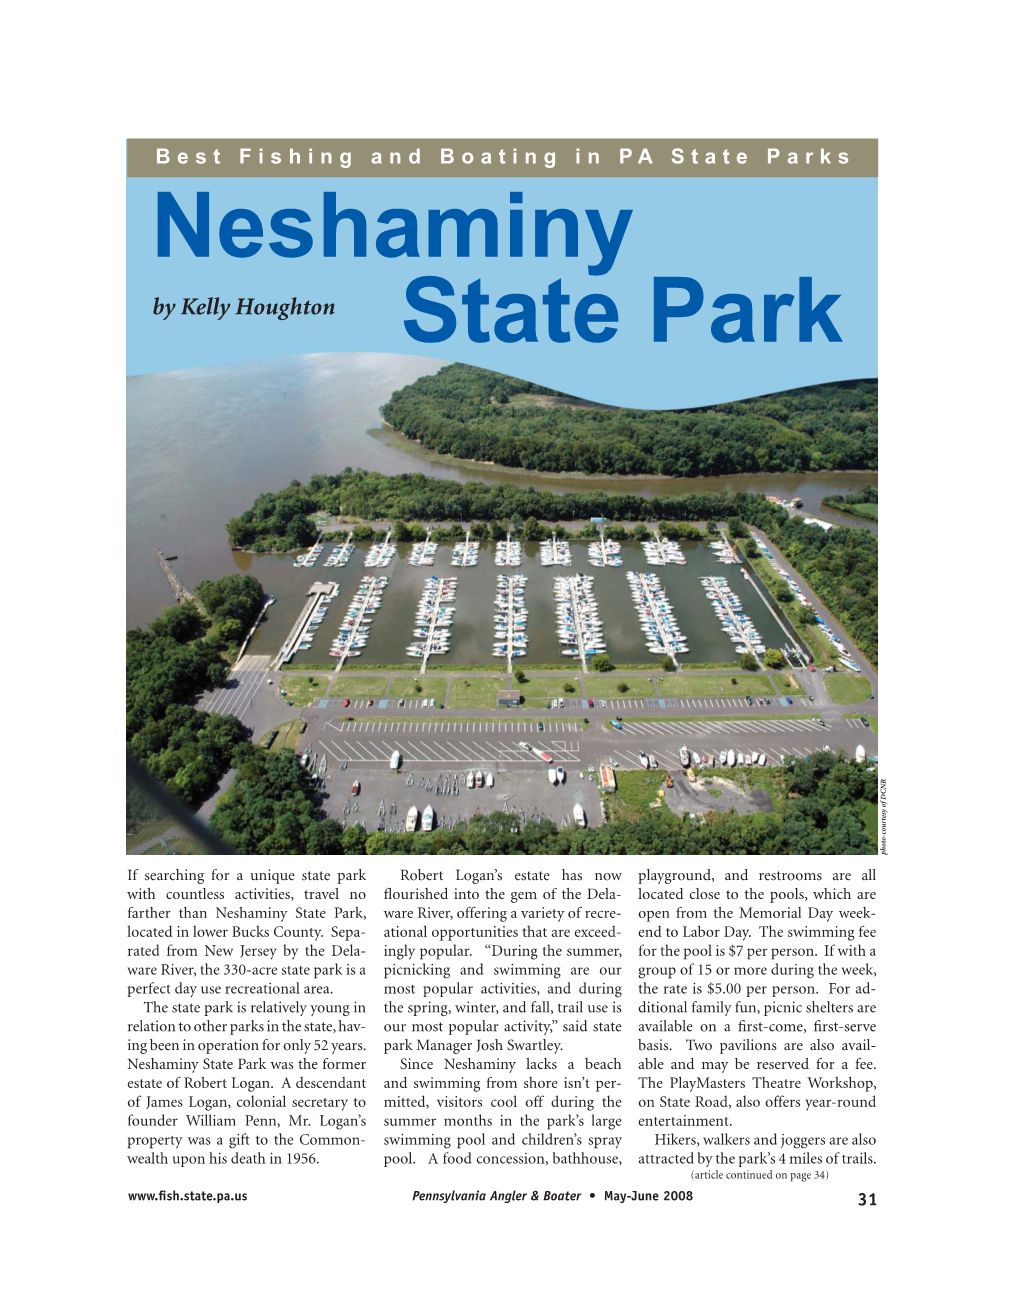 Neshaminy State Park, Ware River, Offering a Variety of Recre- Open from the Memorial Day Week- Located in Lower Bucks County